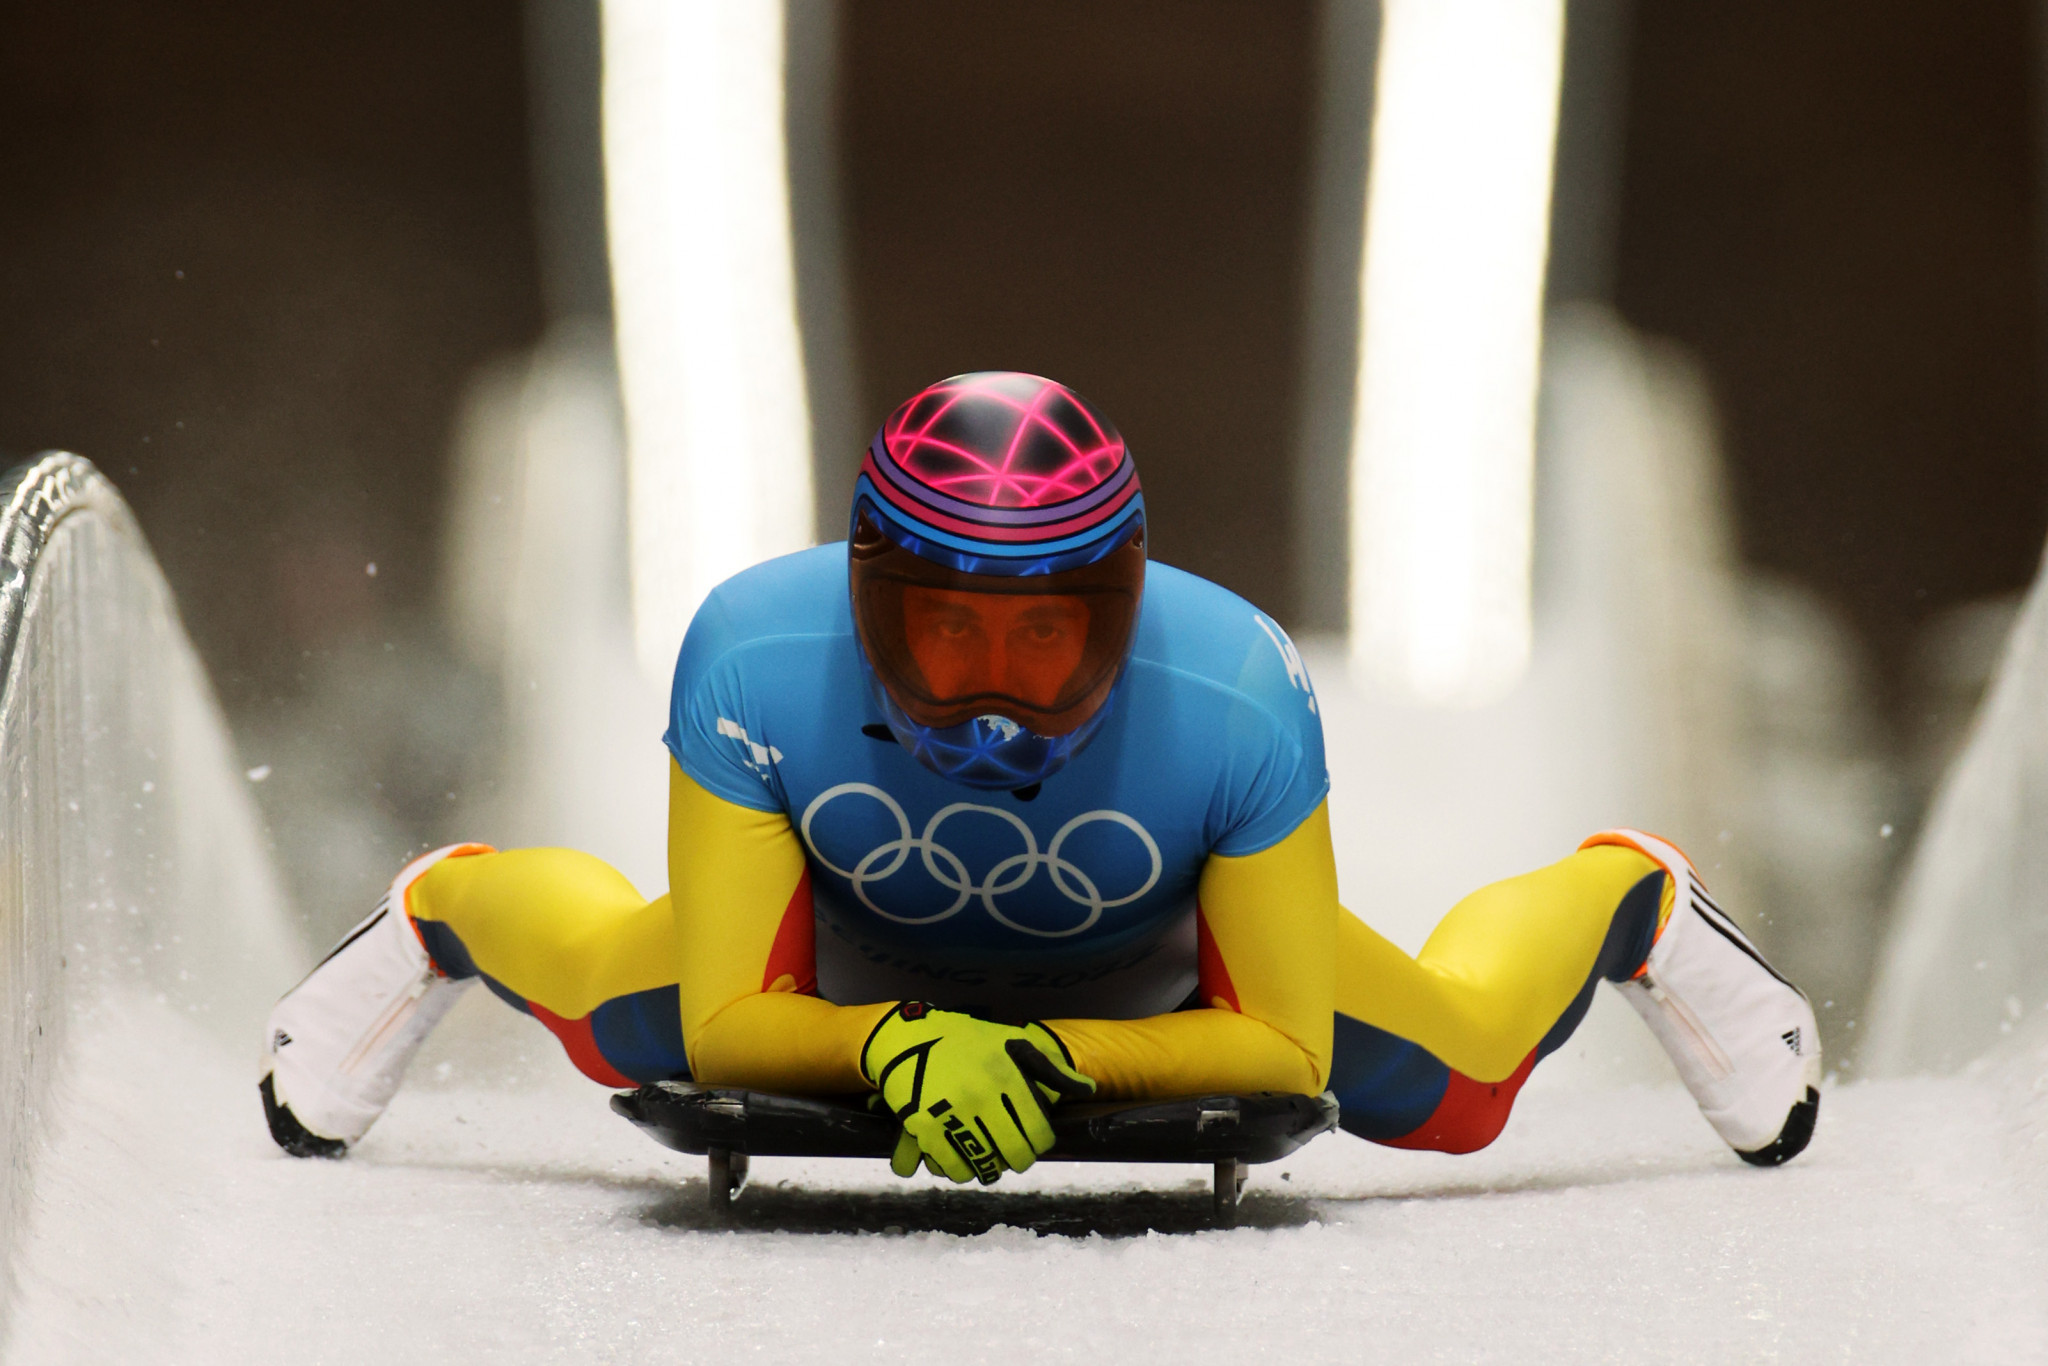 Royal Spanish Ice Sports Federation goes in search of new skeleton athletes